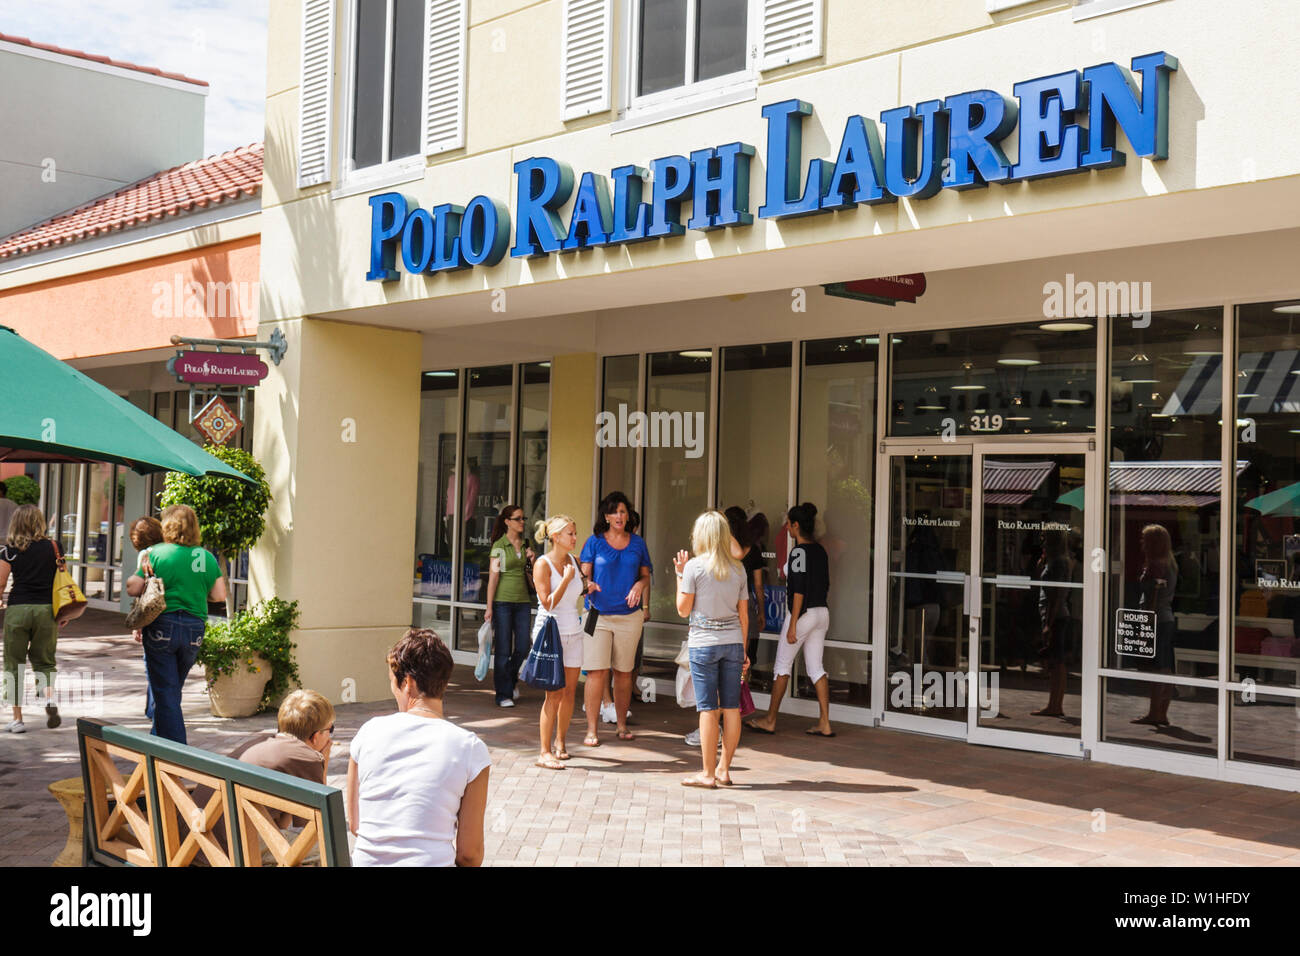 Polo ralph lauren store hi-res stock photography and images - Alamy